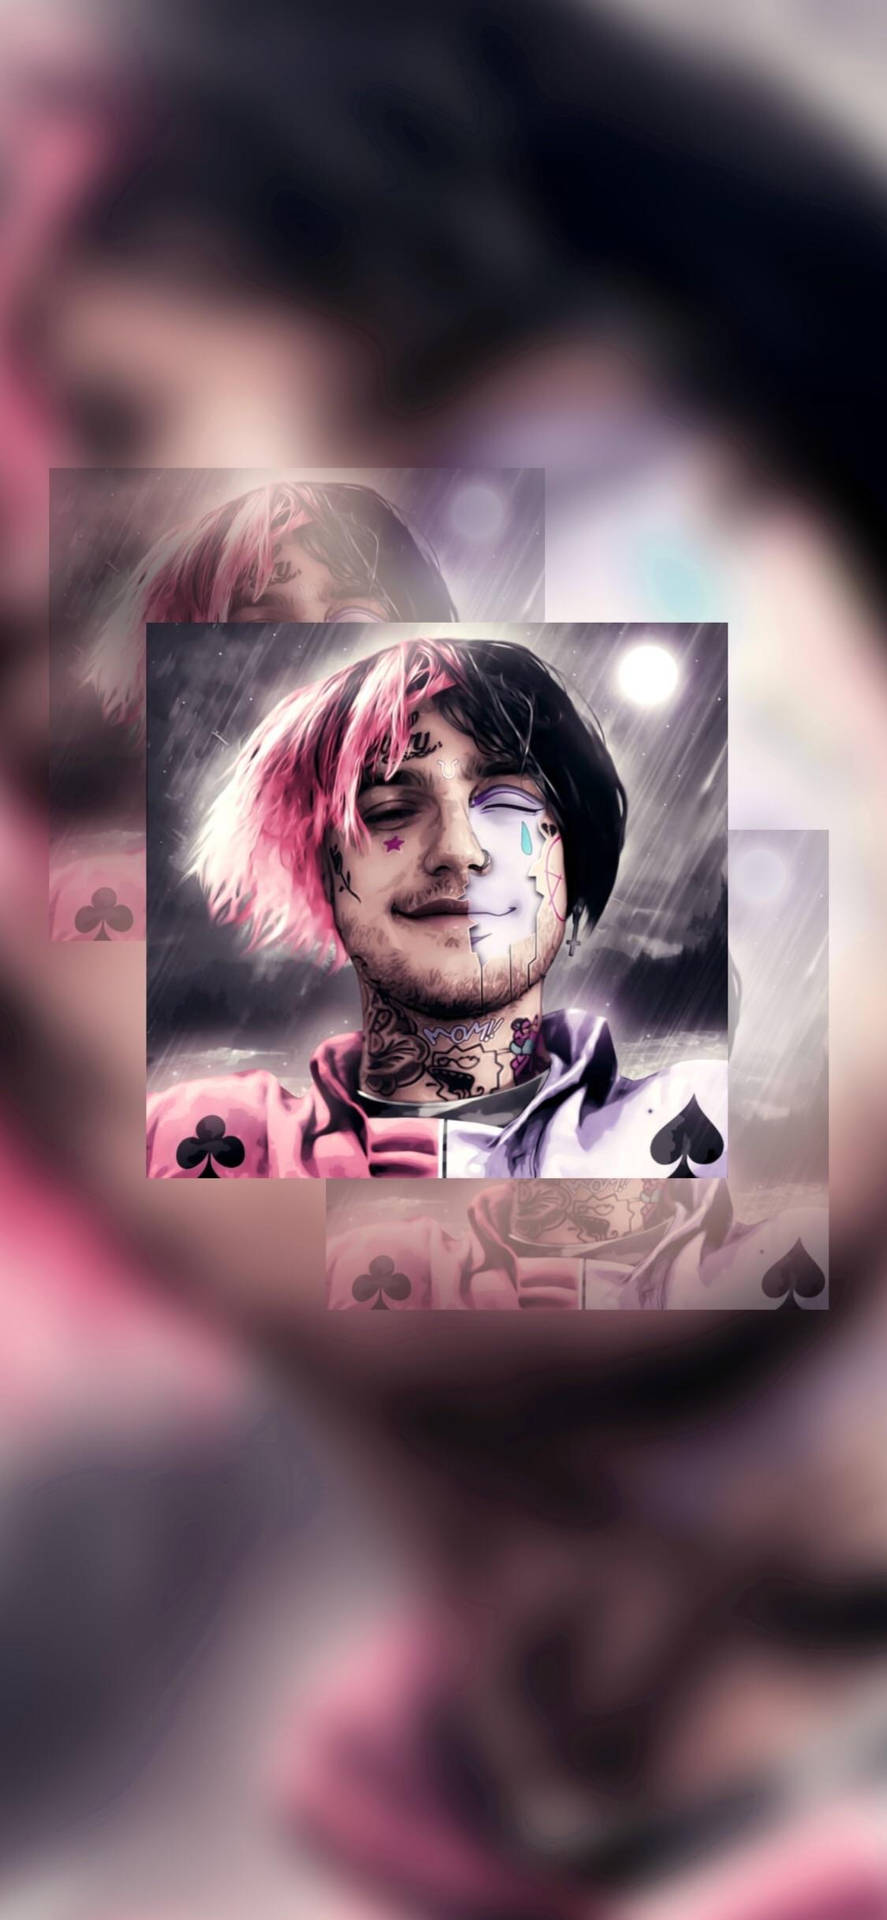 "The late Lil Peep embraces his inner beauty." Wallpaper